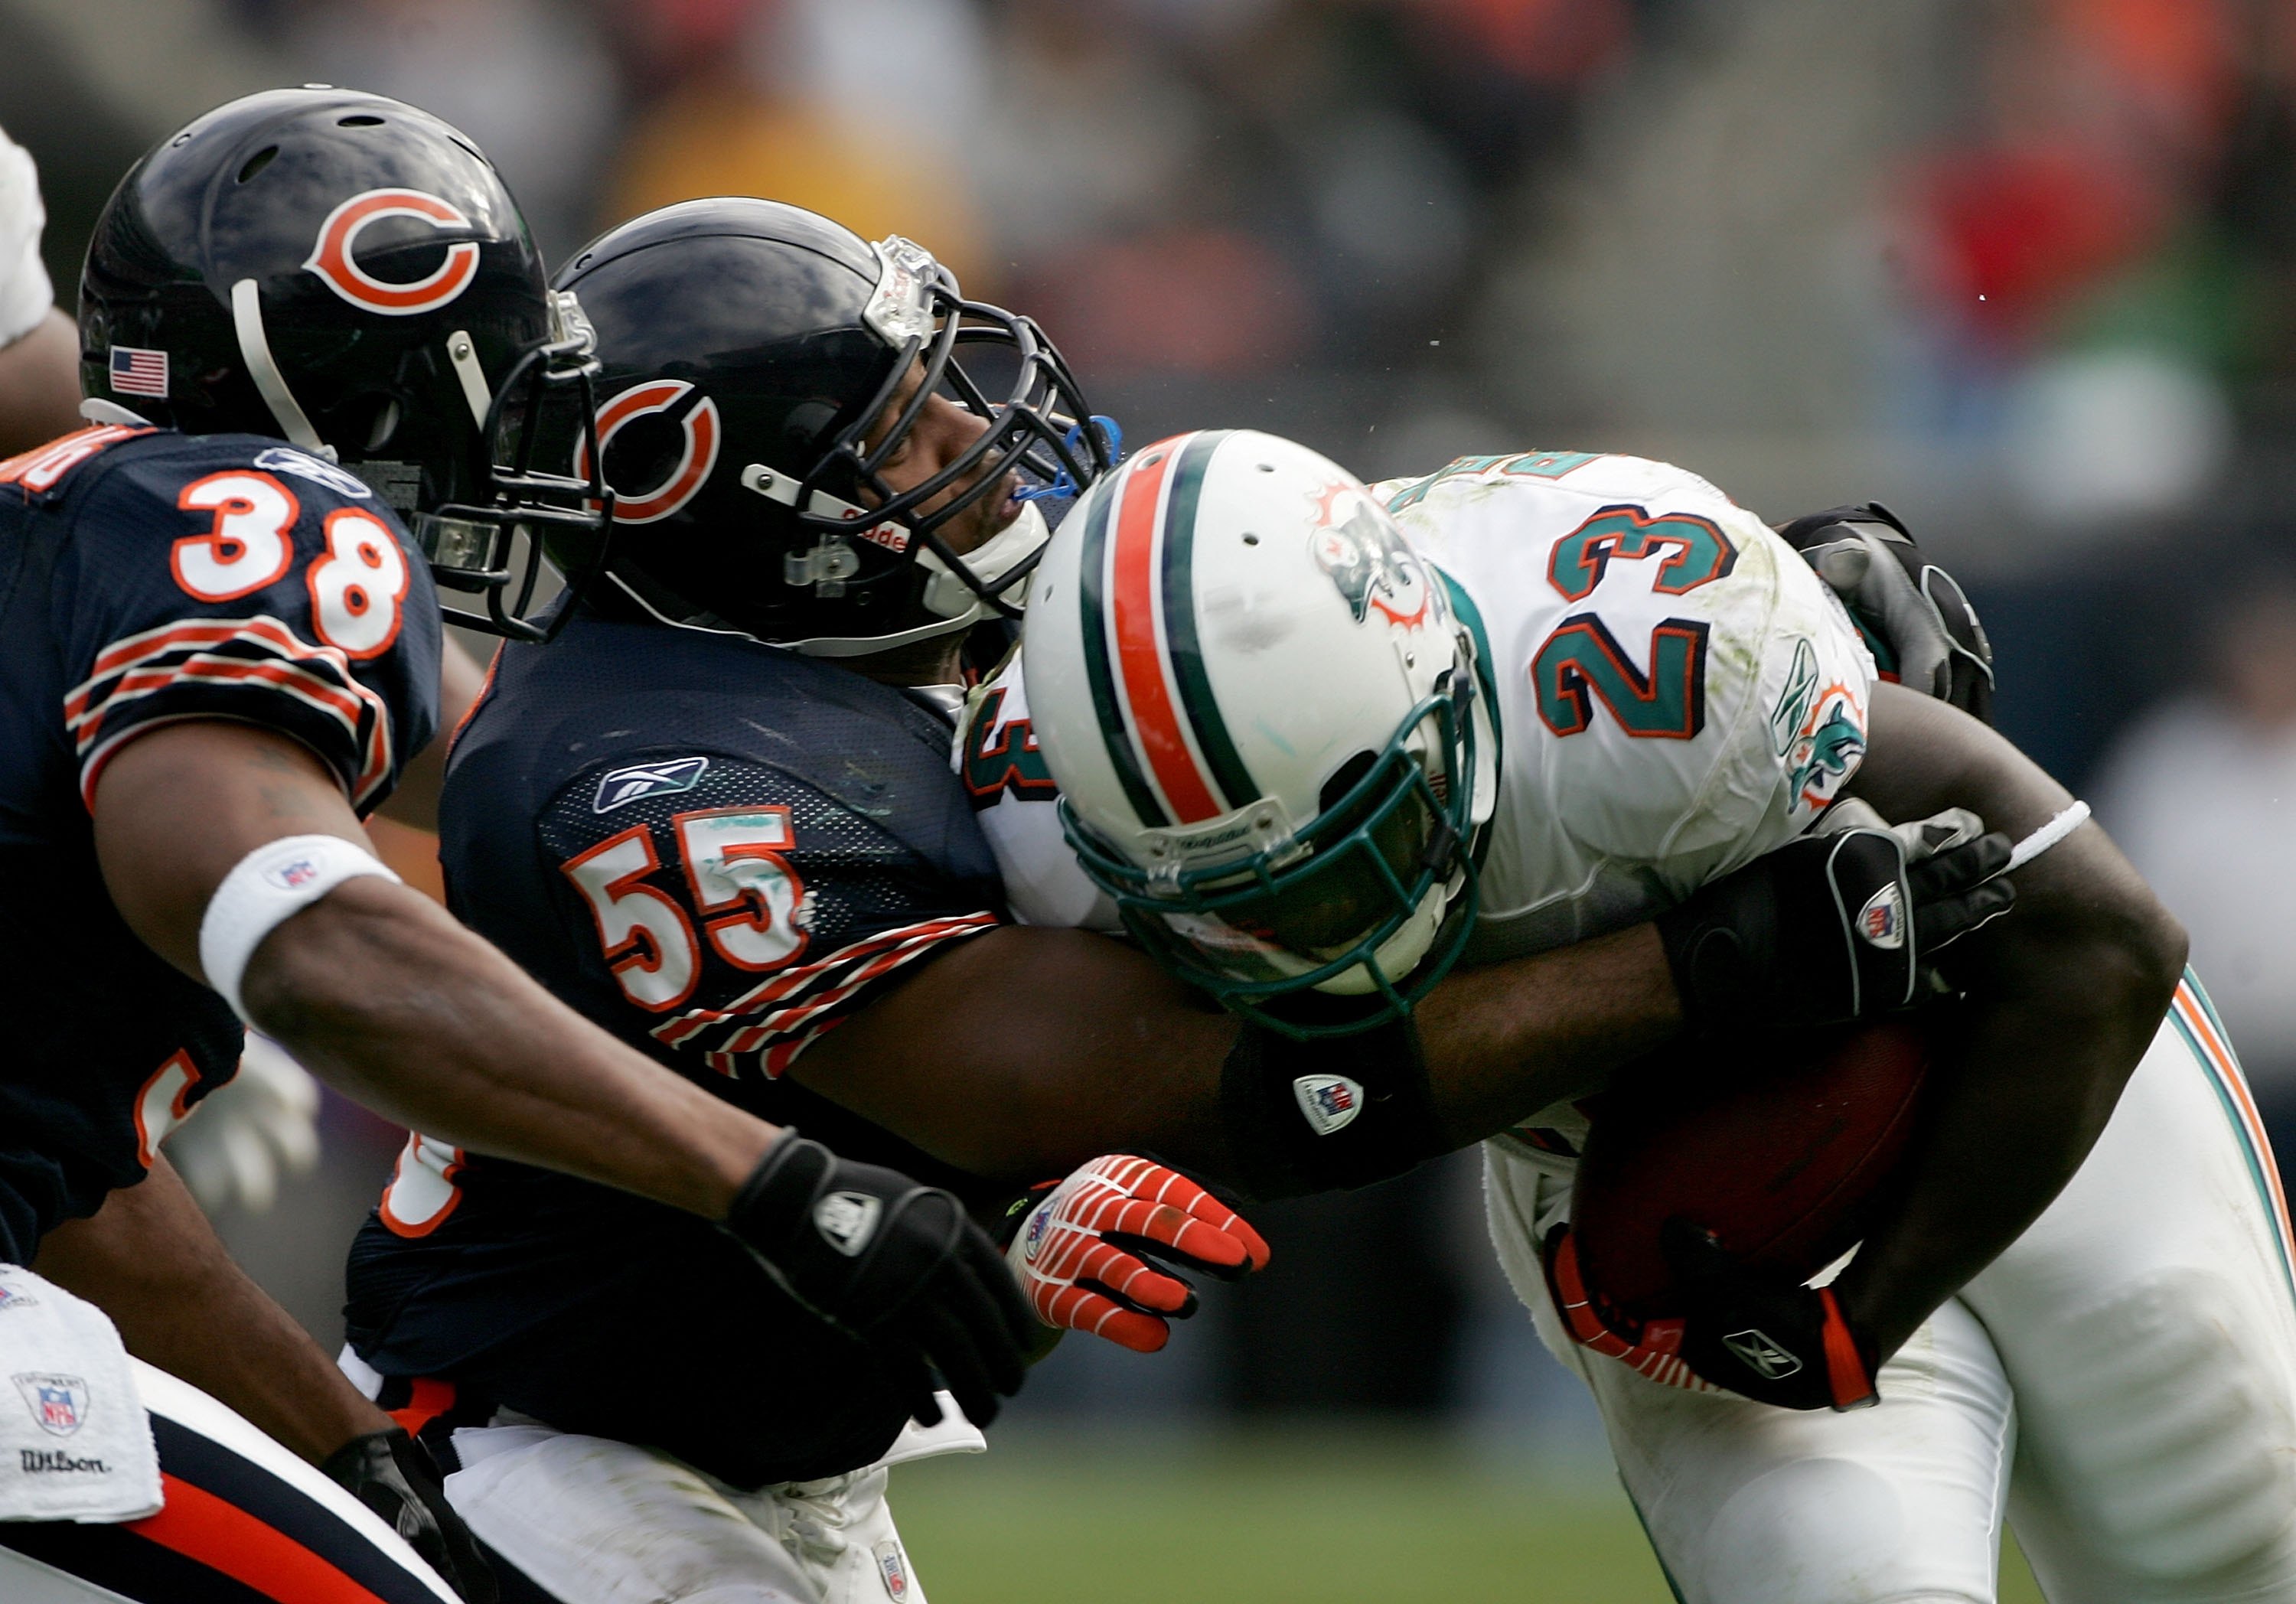 Chicago Bears vs. Miami Dolphins: What To Expect and Who Will Win